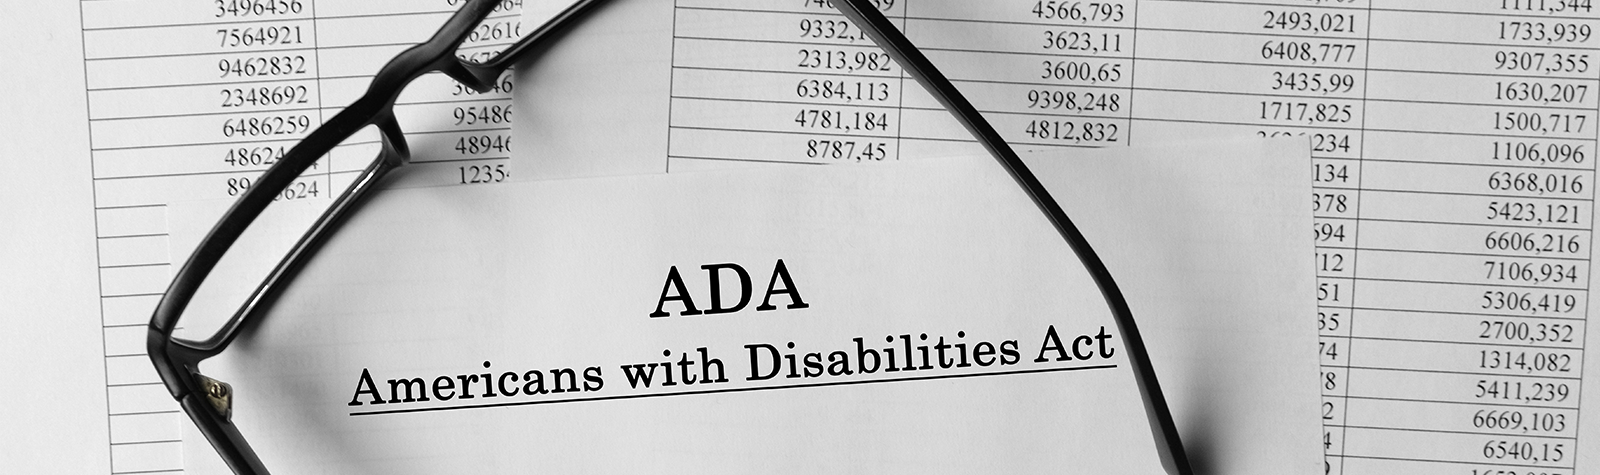 Glasses on spreadsheet full of numbers and text of ADA Americans with Disabilities Act